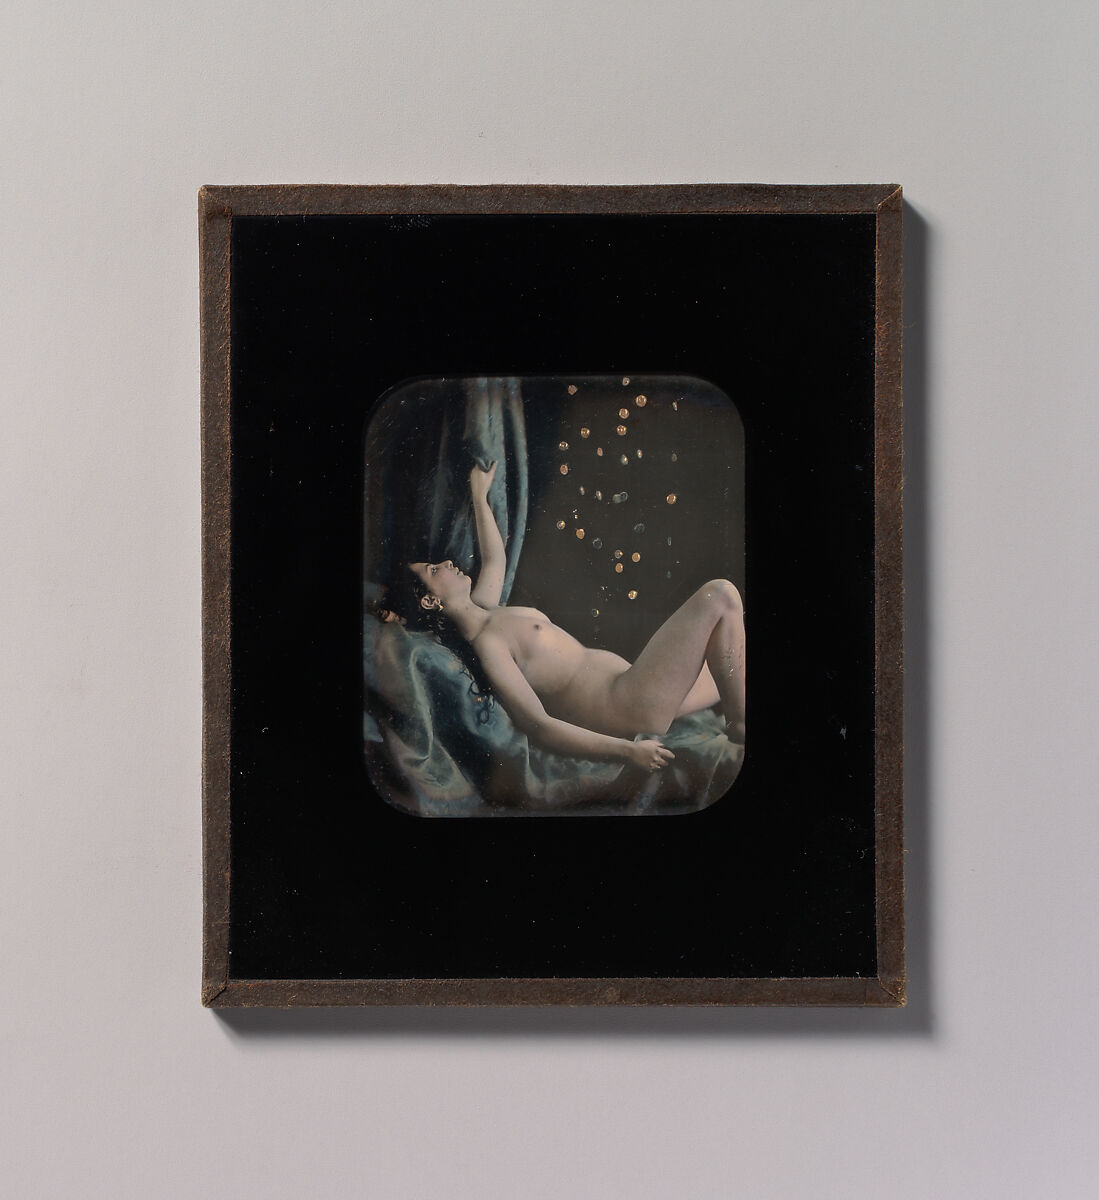 [Reclining Female Nude Posed as Danae], Attributed to Bruno Braquehais (French, 1823–1875), Daguerreotype with applied color 